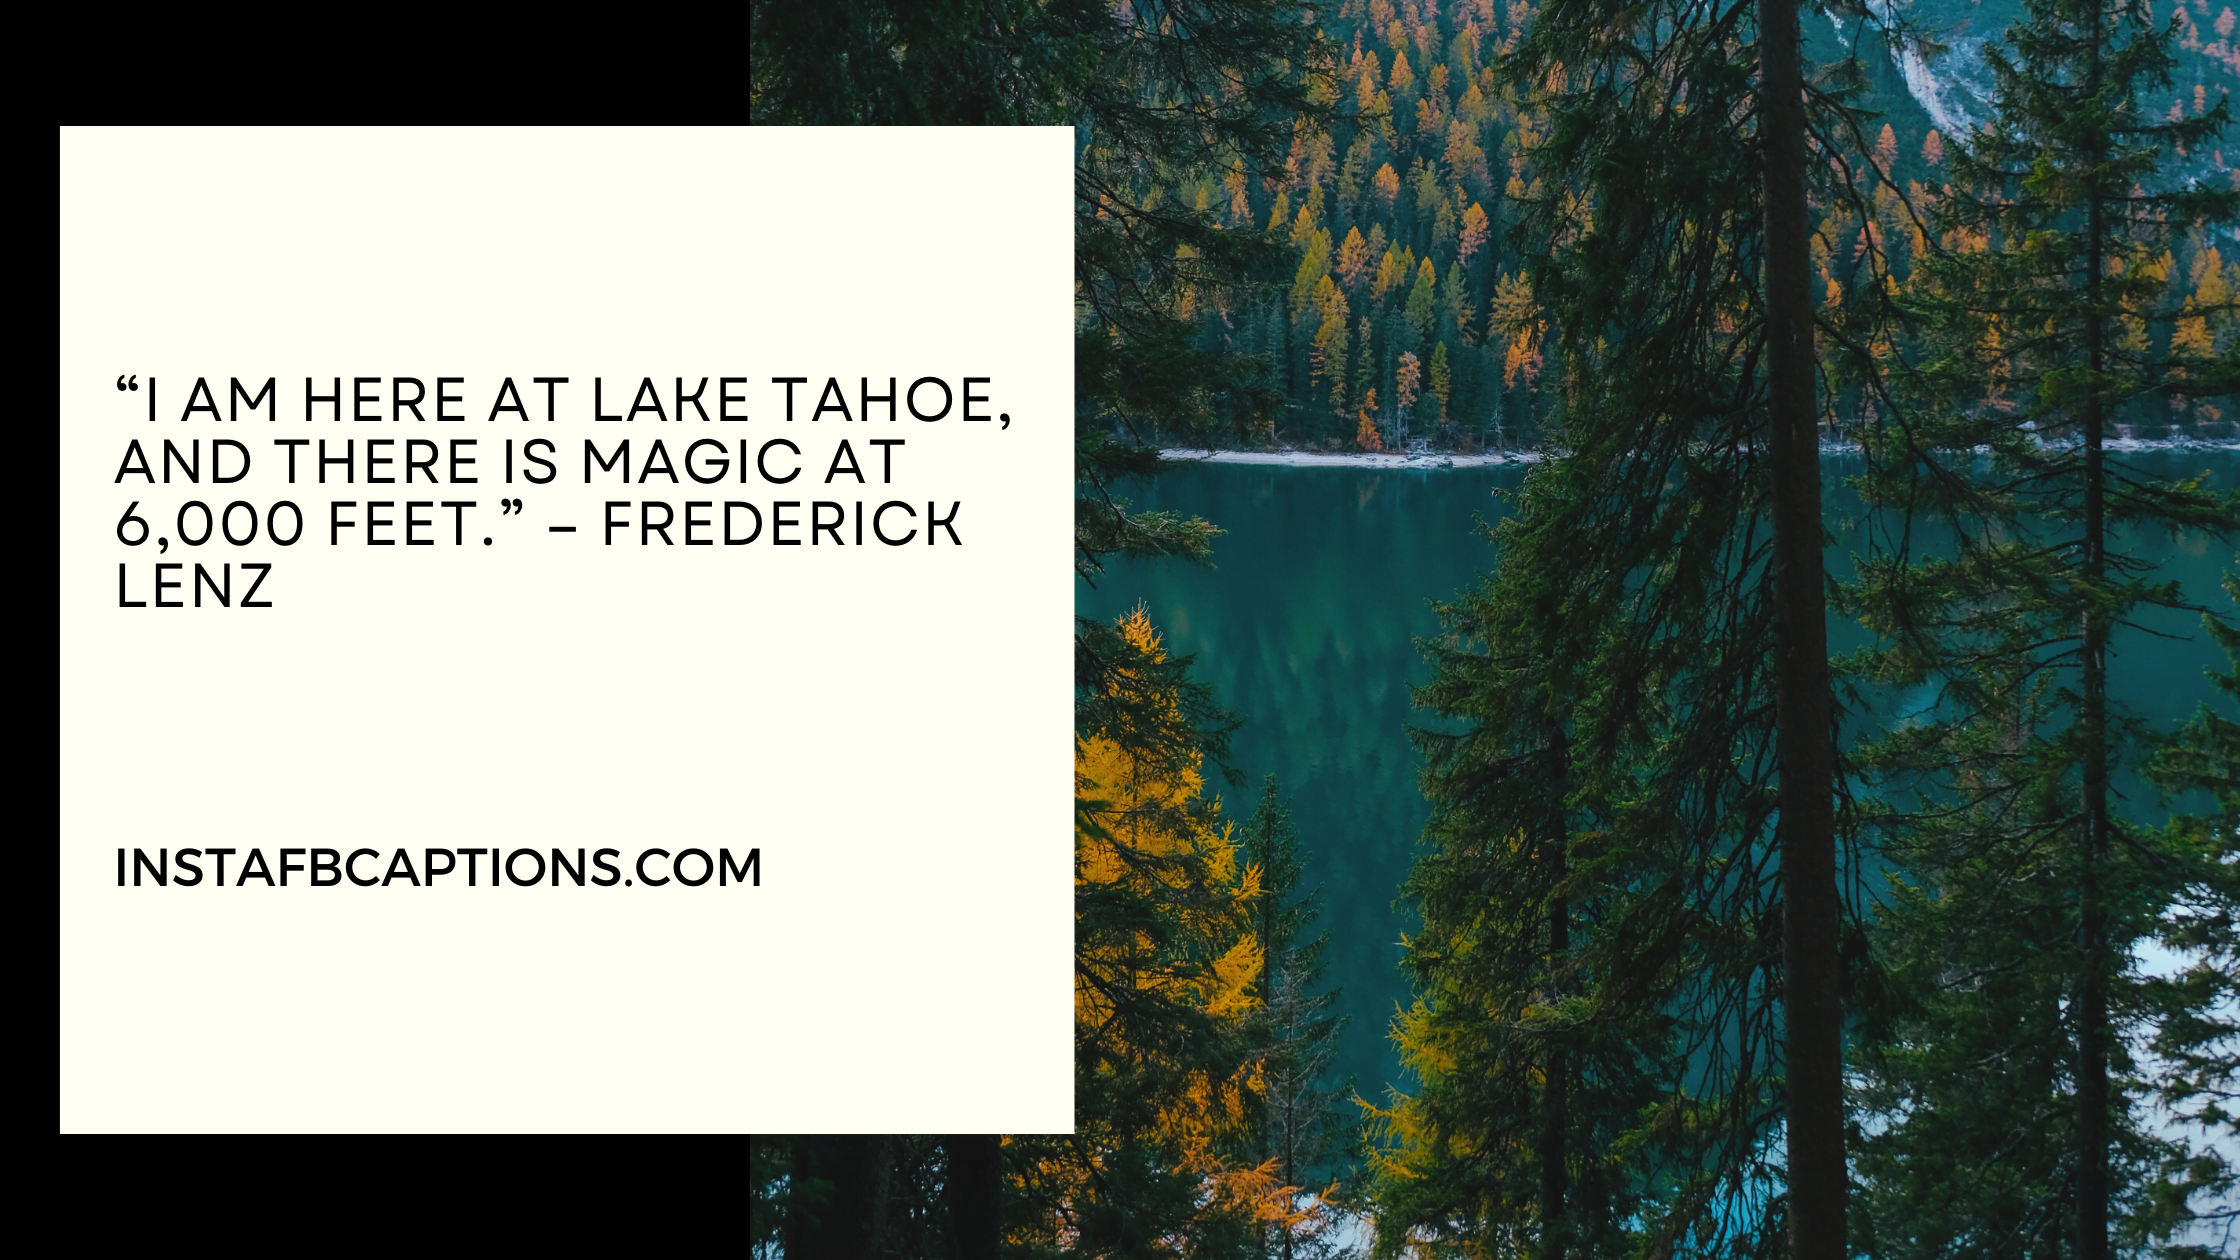 “I am here at Lake Tahoe, and there is magic at 6,000 feet.” – Frederick Lenz  - Lake Tahoe Quotes  - 95+ Dazzling Lake Tahoe Captions in 2022